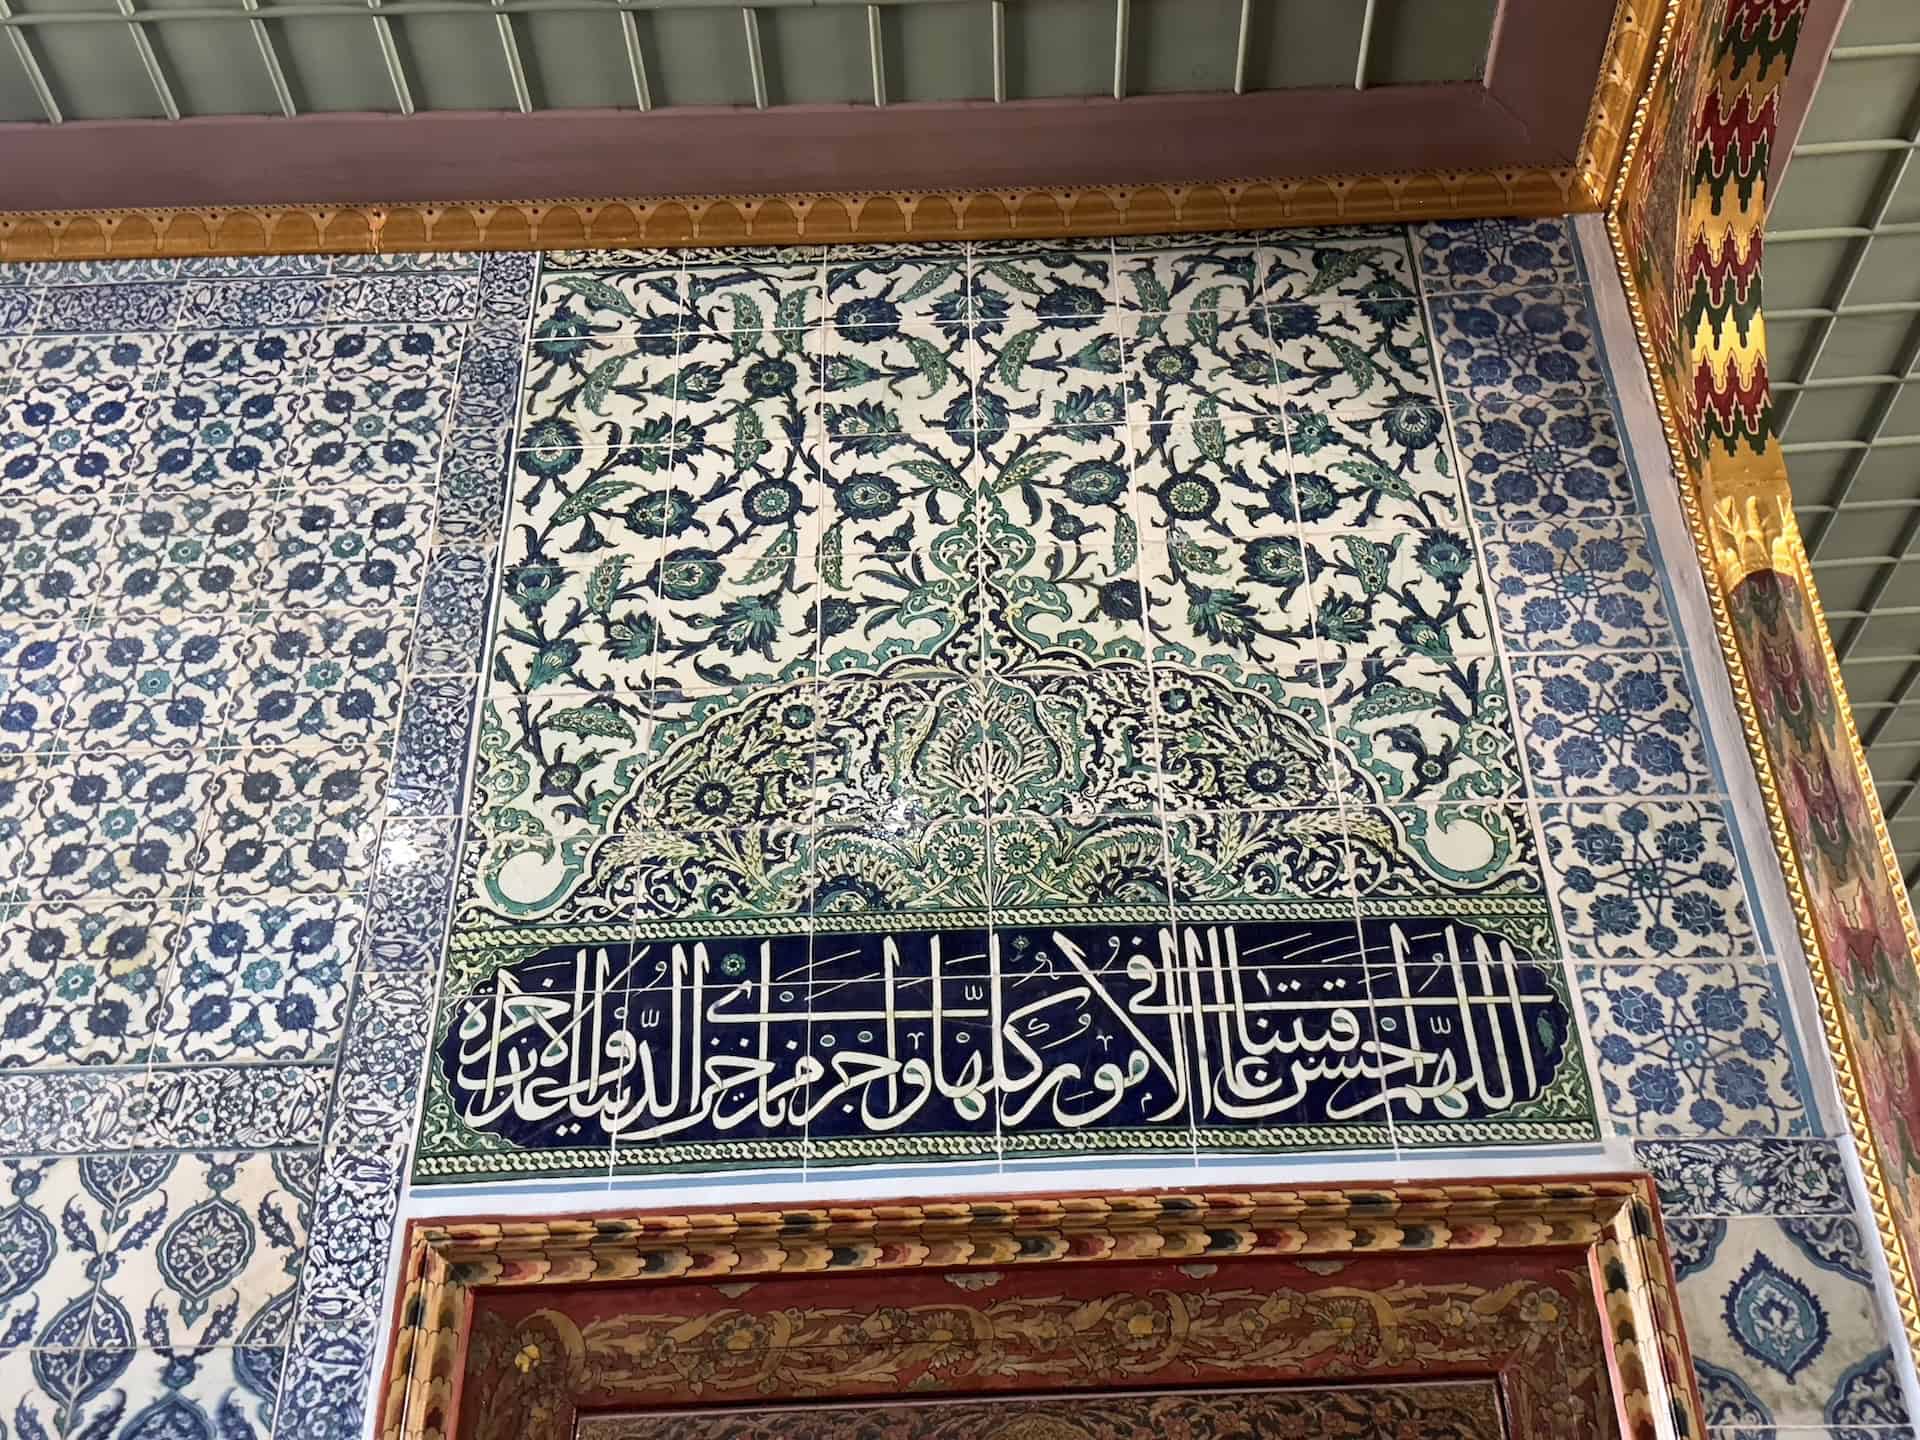 Iznik tiles above the entrance to the corridor at the Sultan's Pavilion